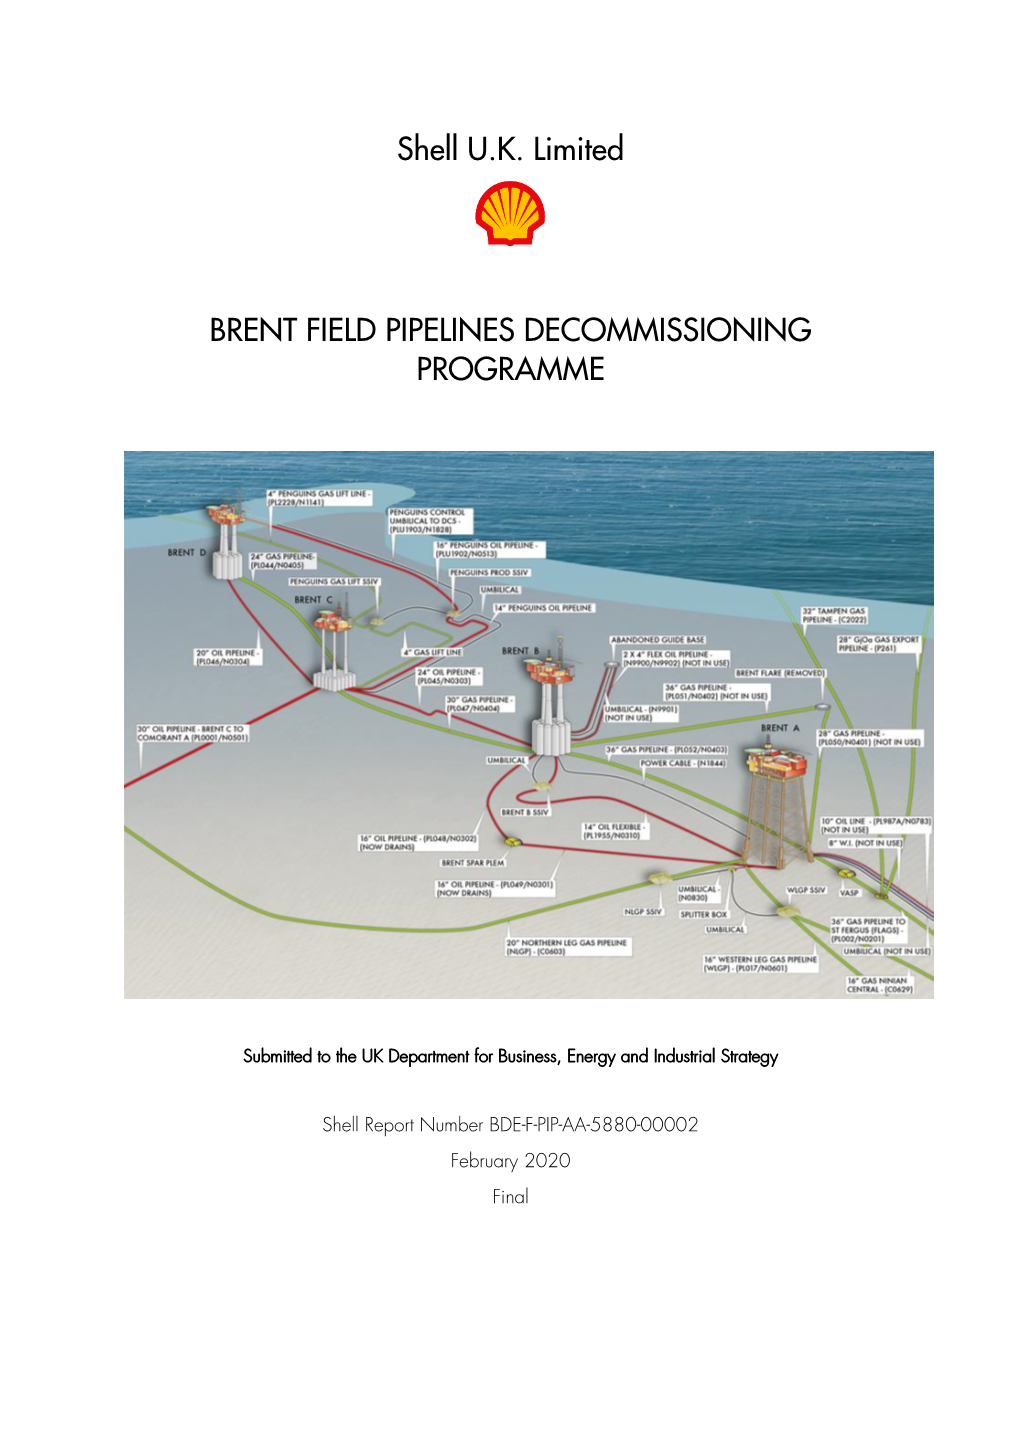 Brent Field Pipelines Decommissioning Programme